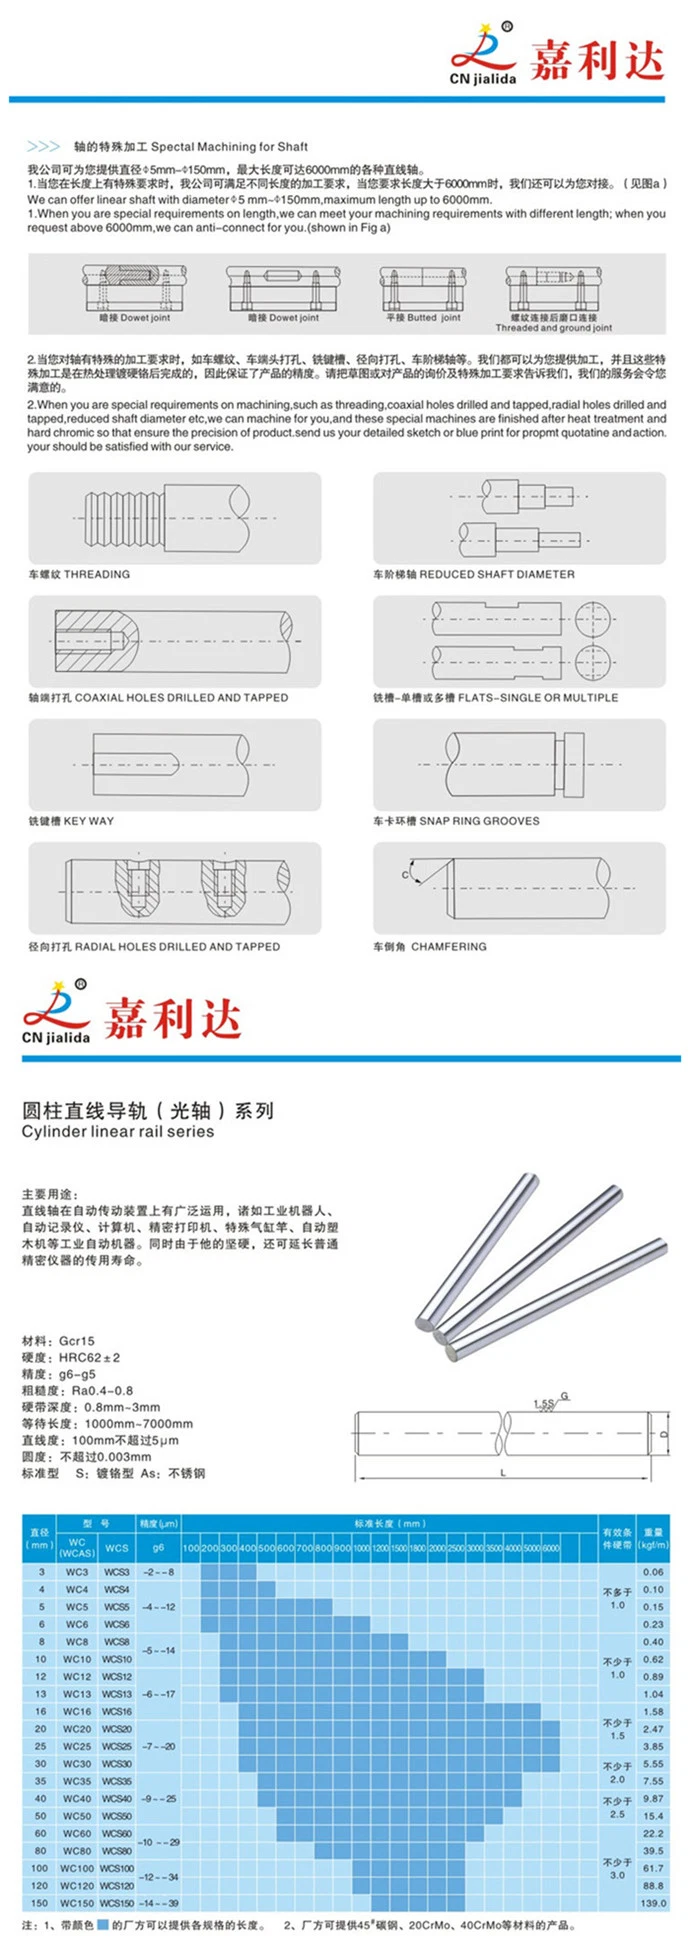 China Bearing Exporter Chrome Plated Gcr15 Steel Round Bar (WCS SFC series 60mm)